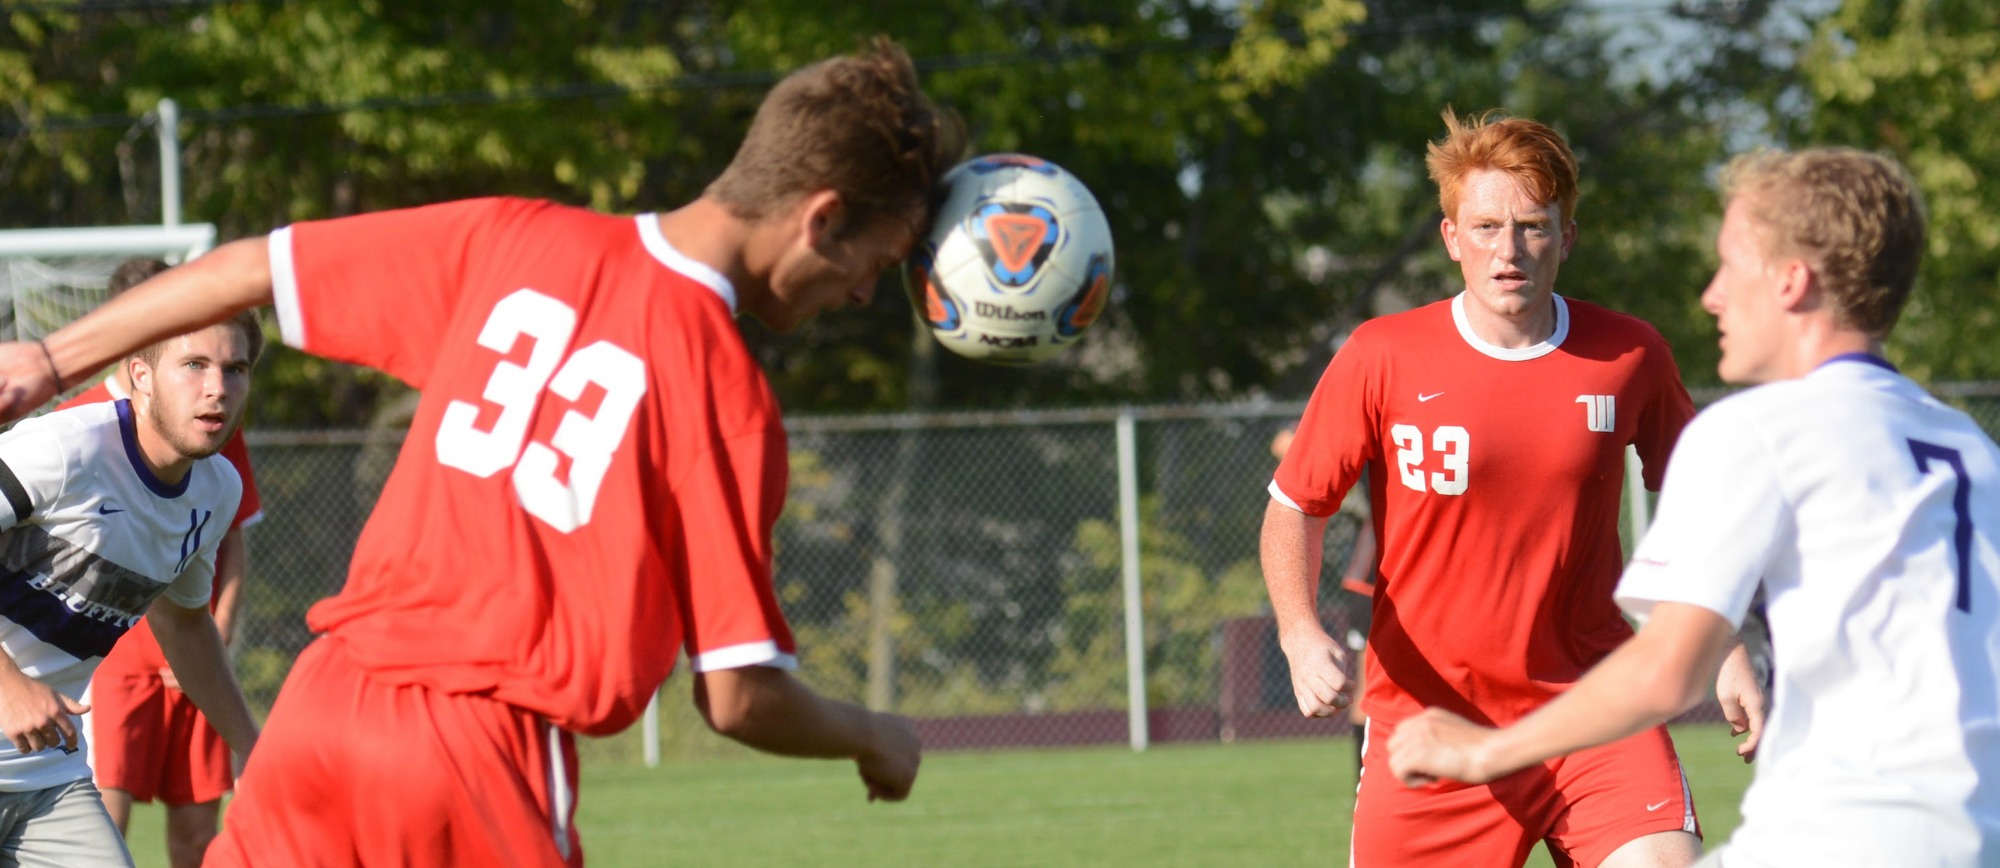 Zaragoza's Early Goal Not Enough at Ohio Northern